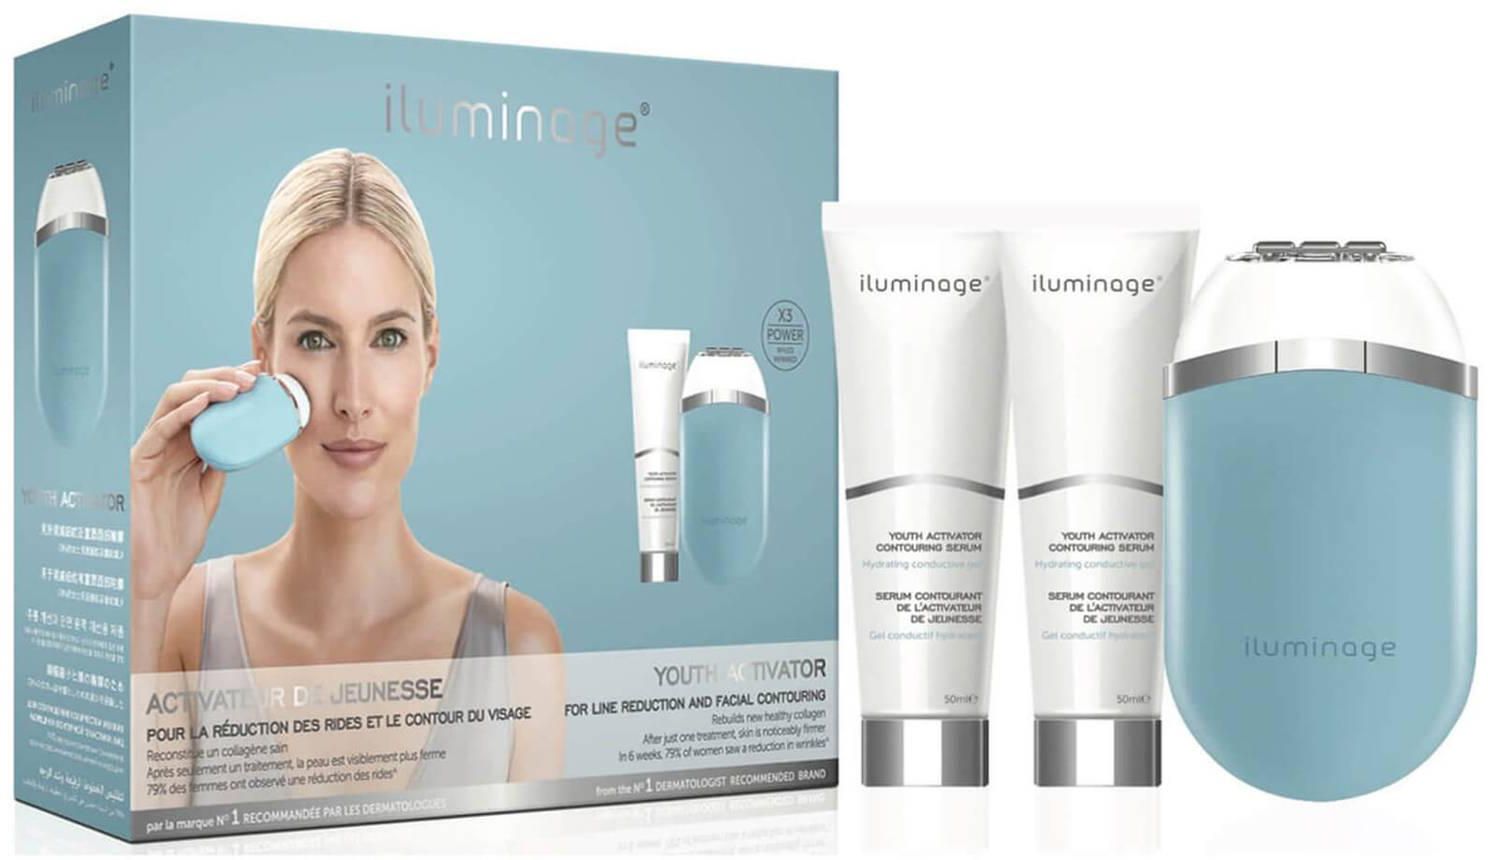 Iluminage Youth Activator Infrared LED Radio Frequency Anti-Aging Device and 2 Youth Activator Serums (1 kit)